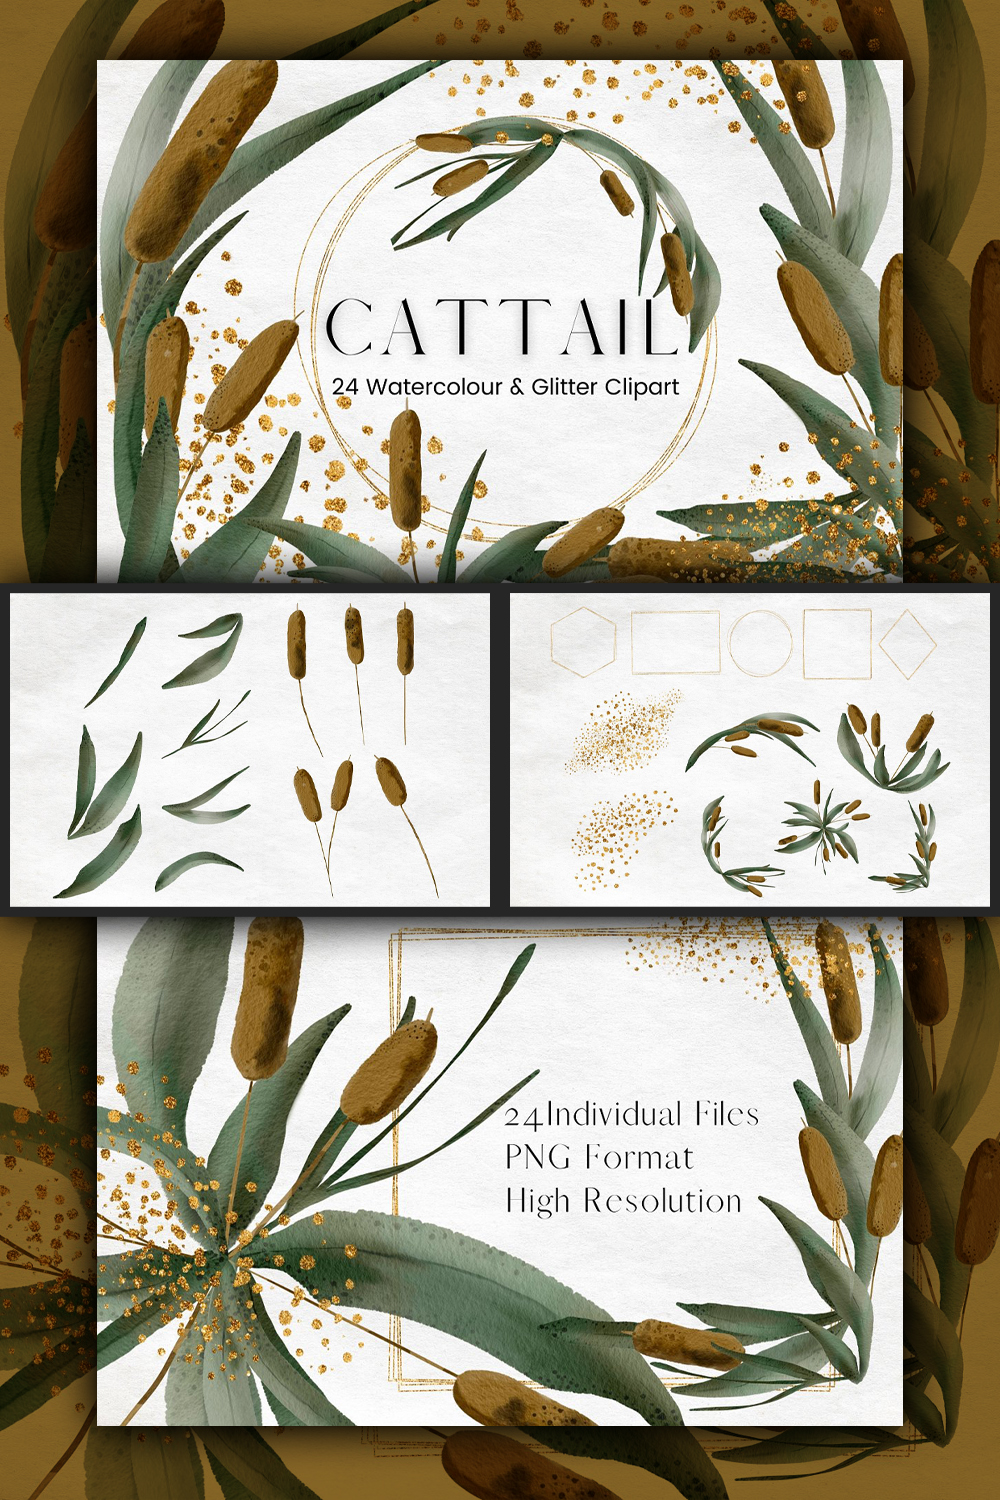 Pinterest illustrations of watercolour cattail clipart.